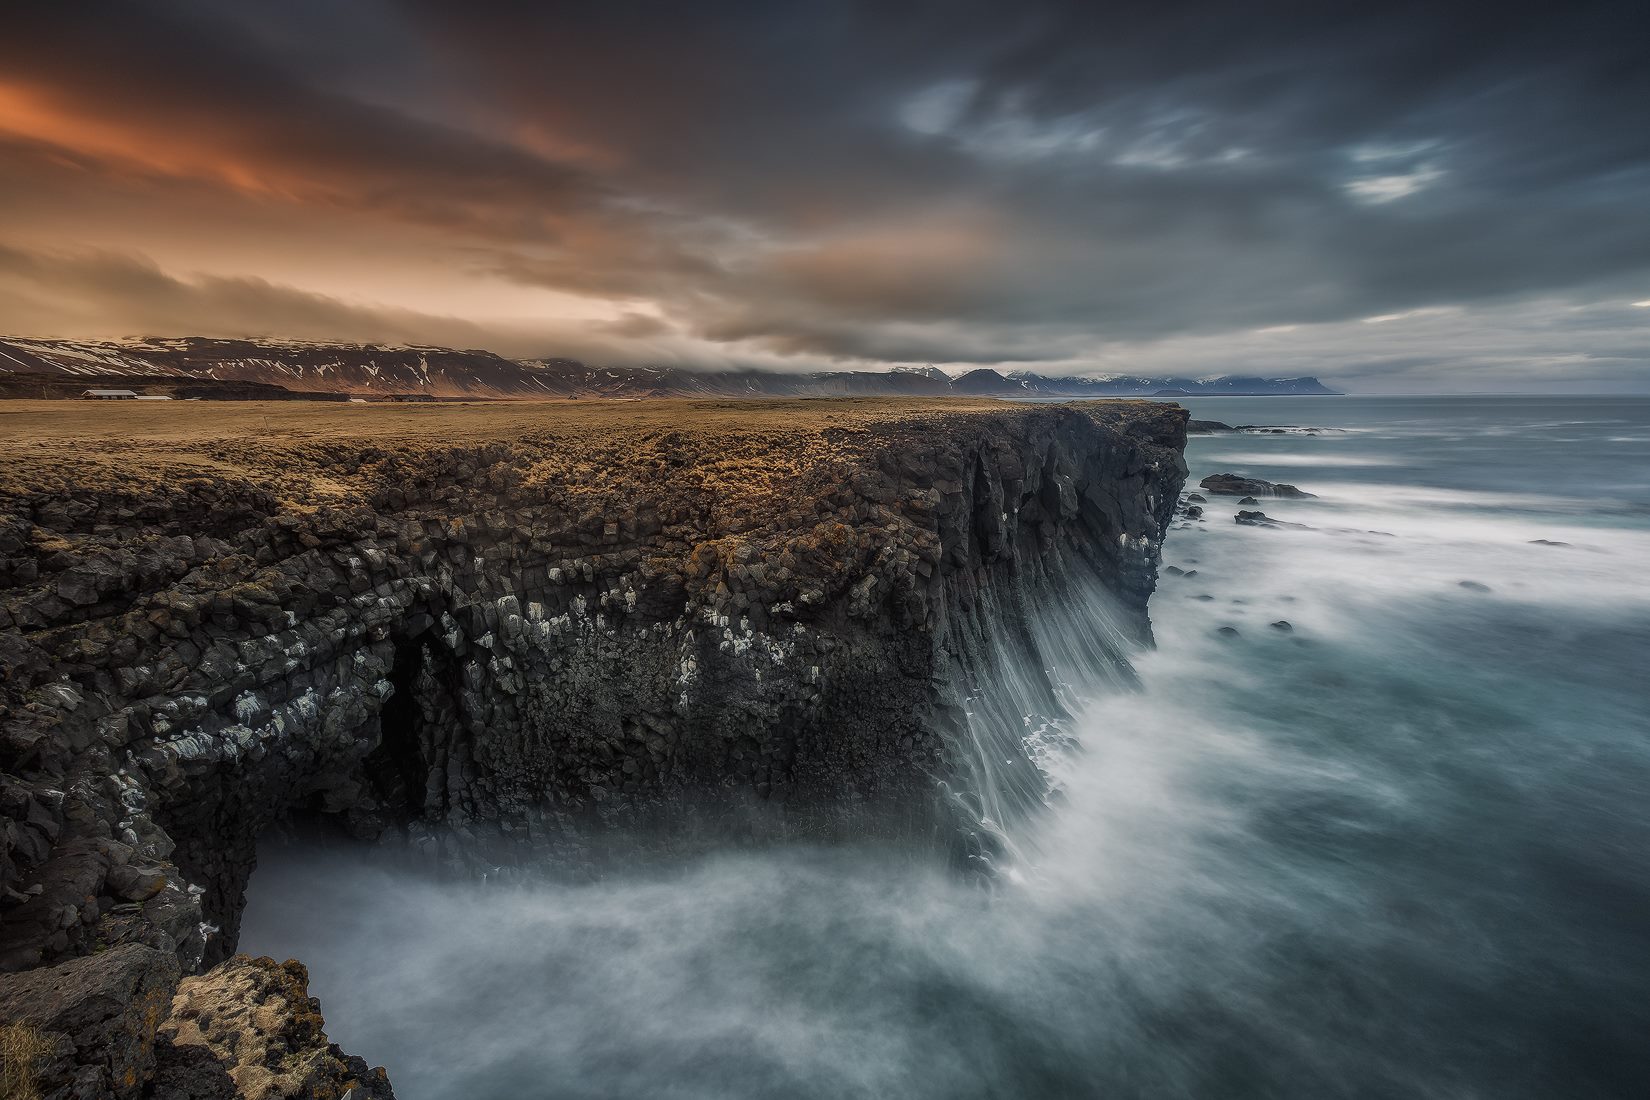 The dramatic coastlines of the Snæfellsnes Peninsula will surely leave you speechless.